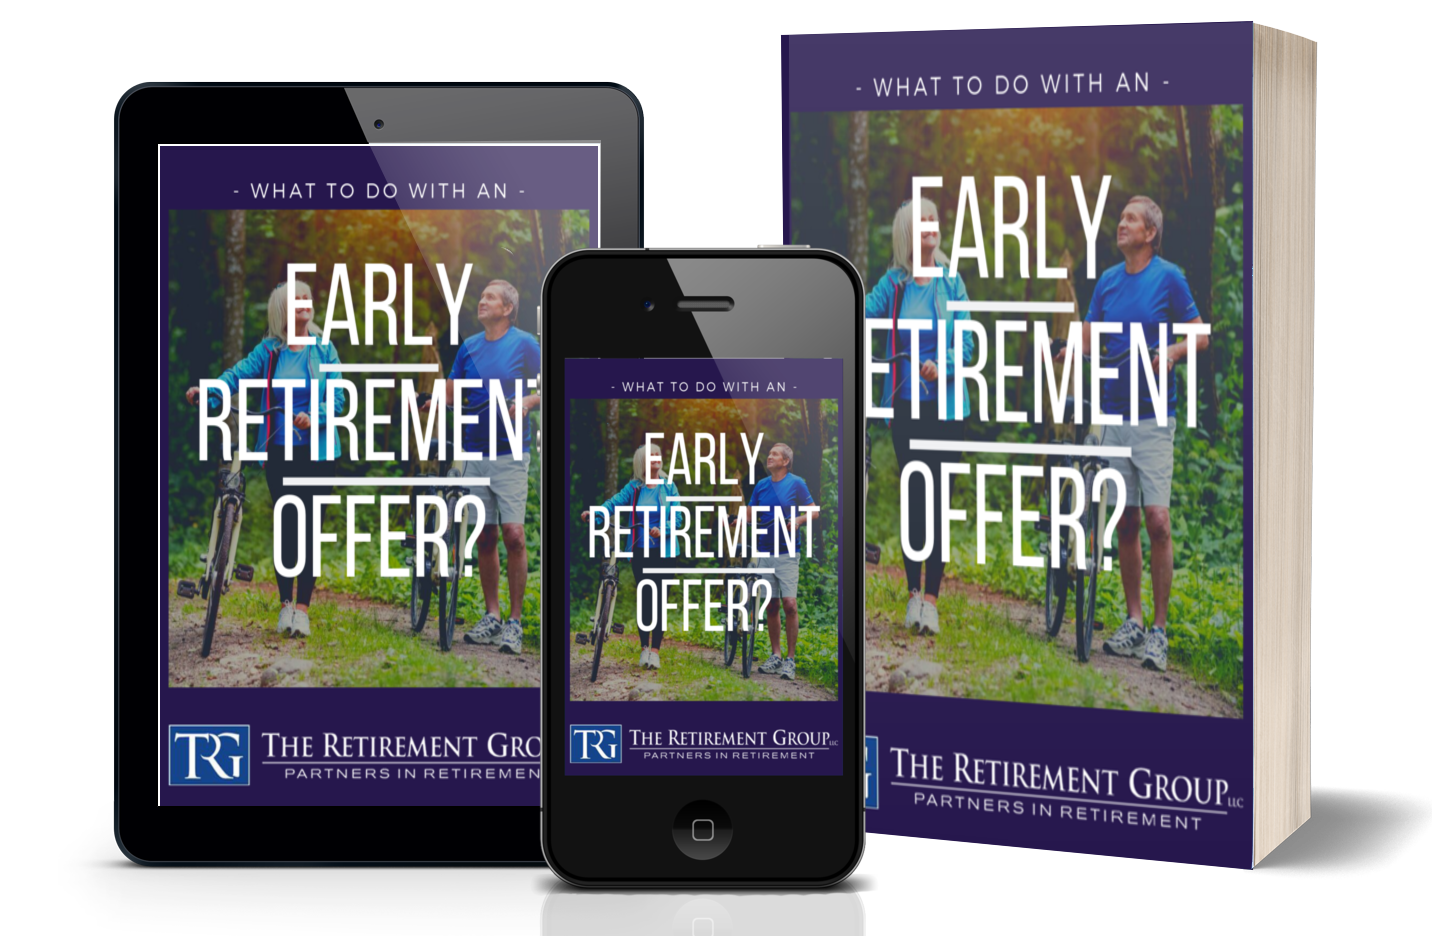 What to do with an Early Retirement Offer?